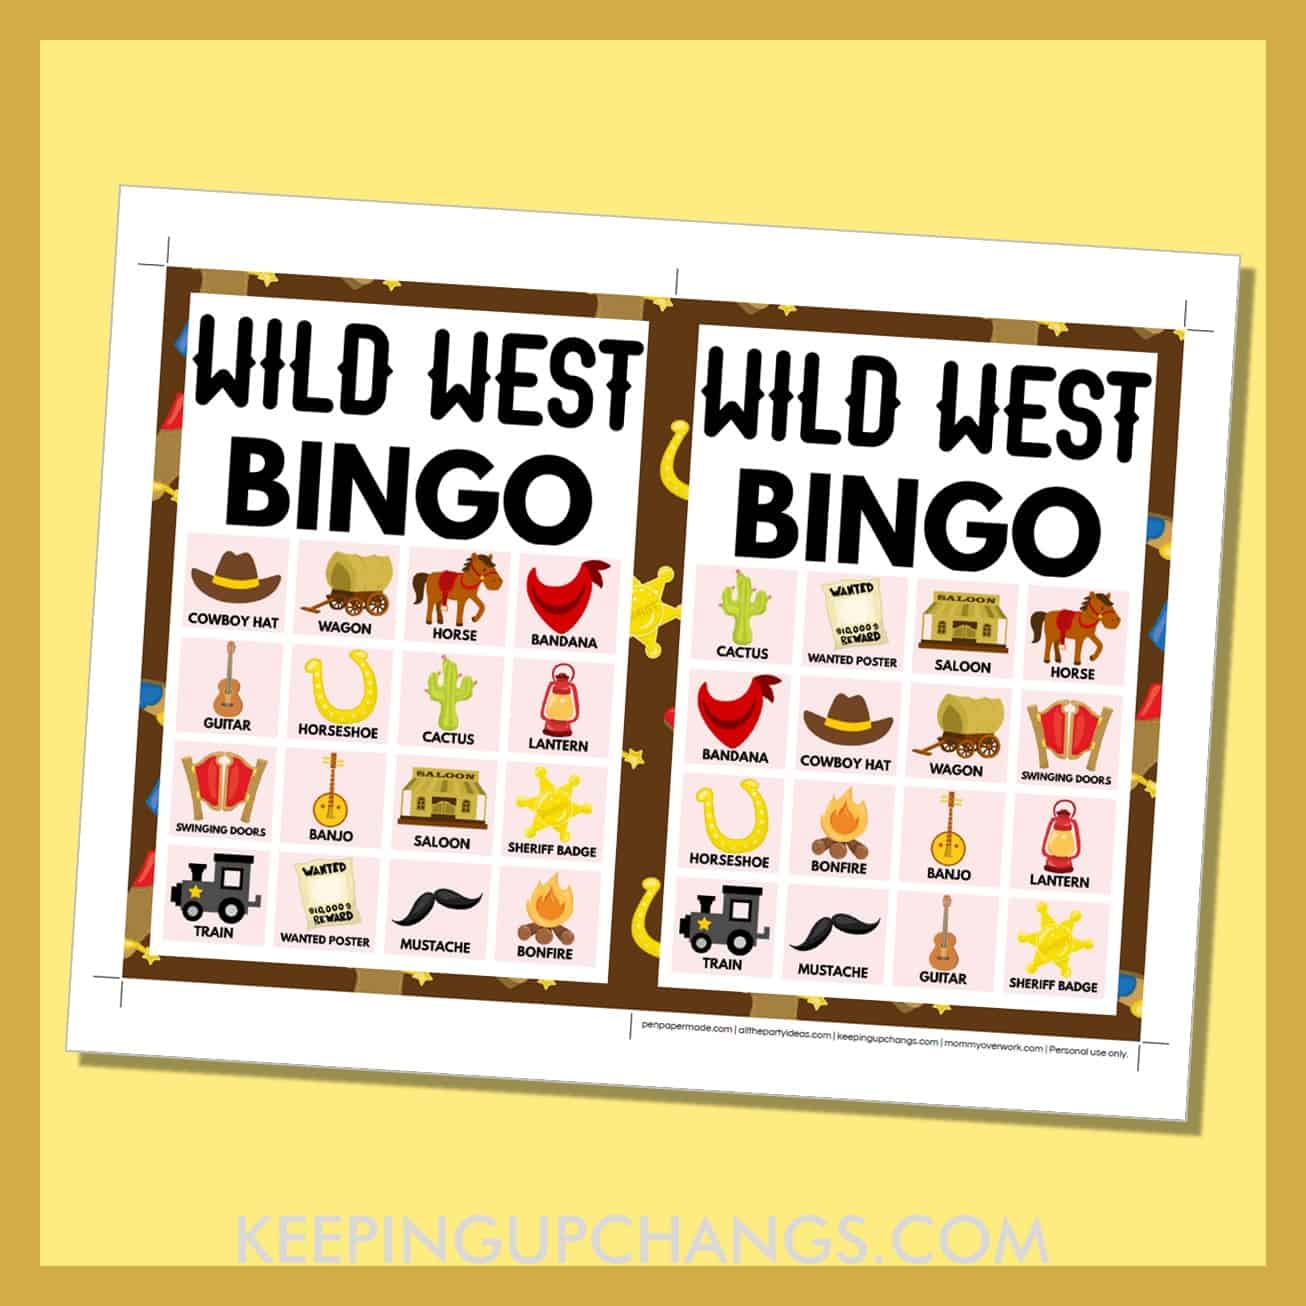 free wild west bingo card 4x4 5x7 game boards with images and text words.